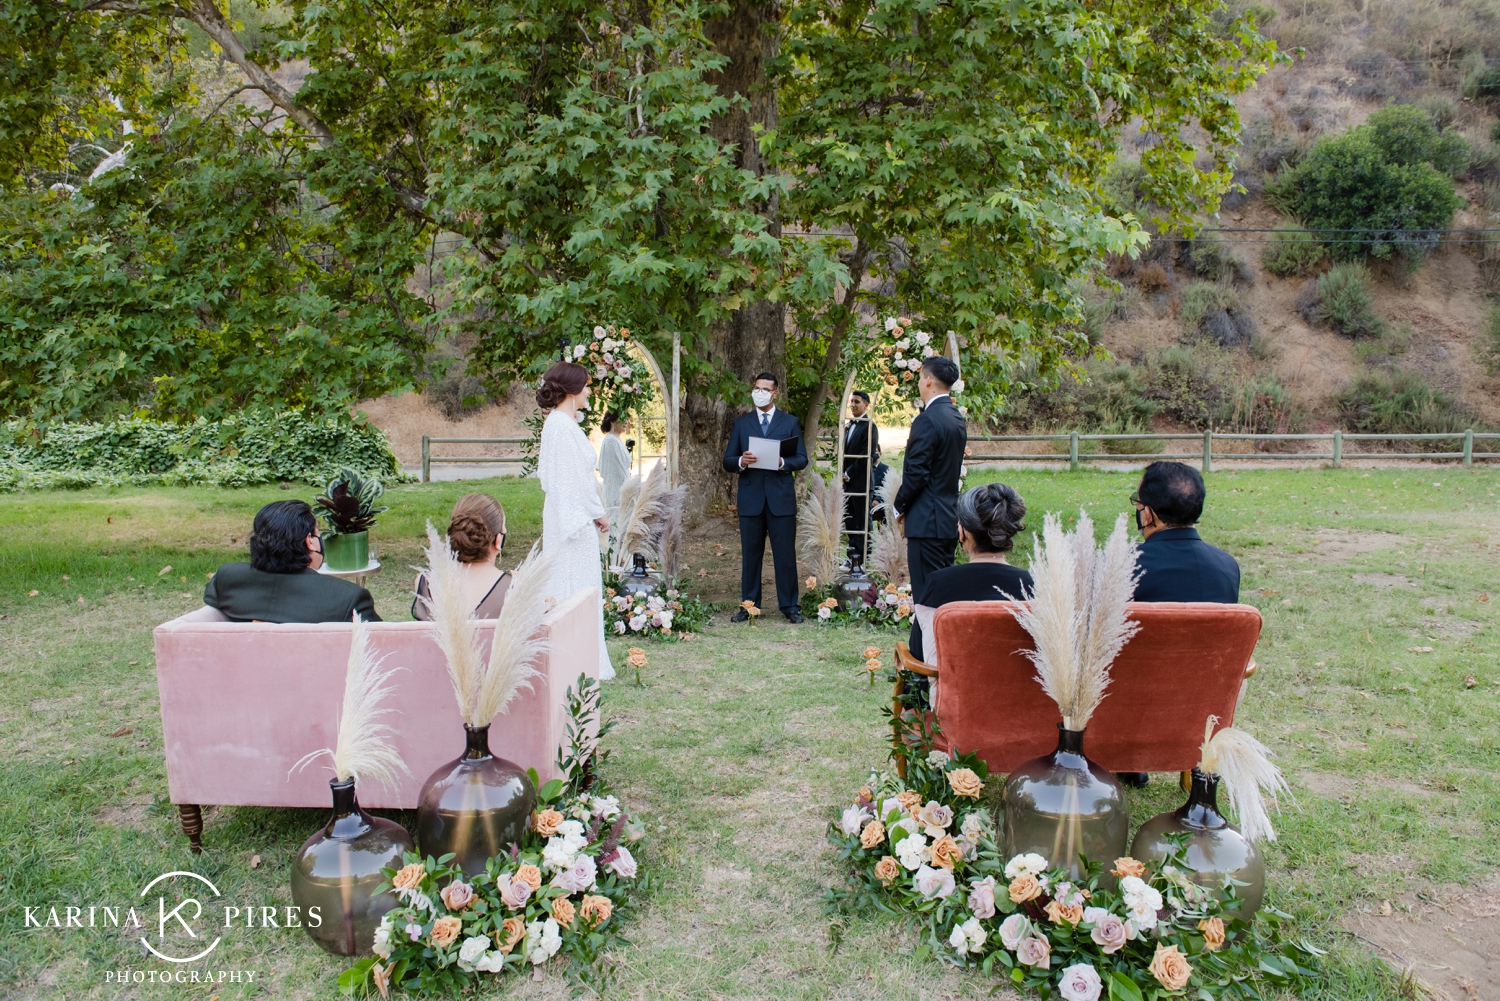 Wedding ceremony lounge - rentals from Archive Rentals - Los Angeles Elopement